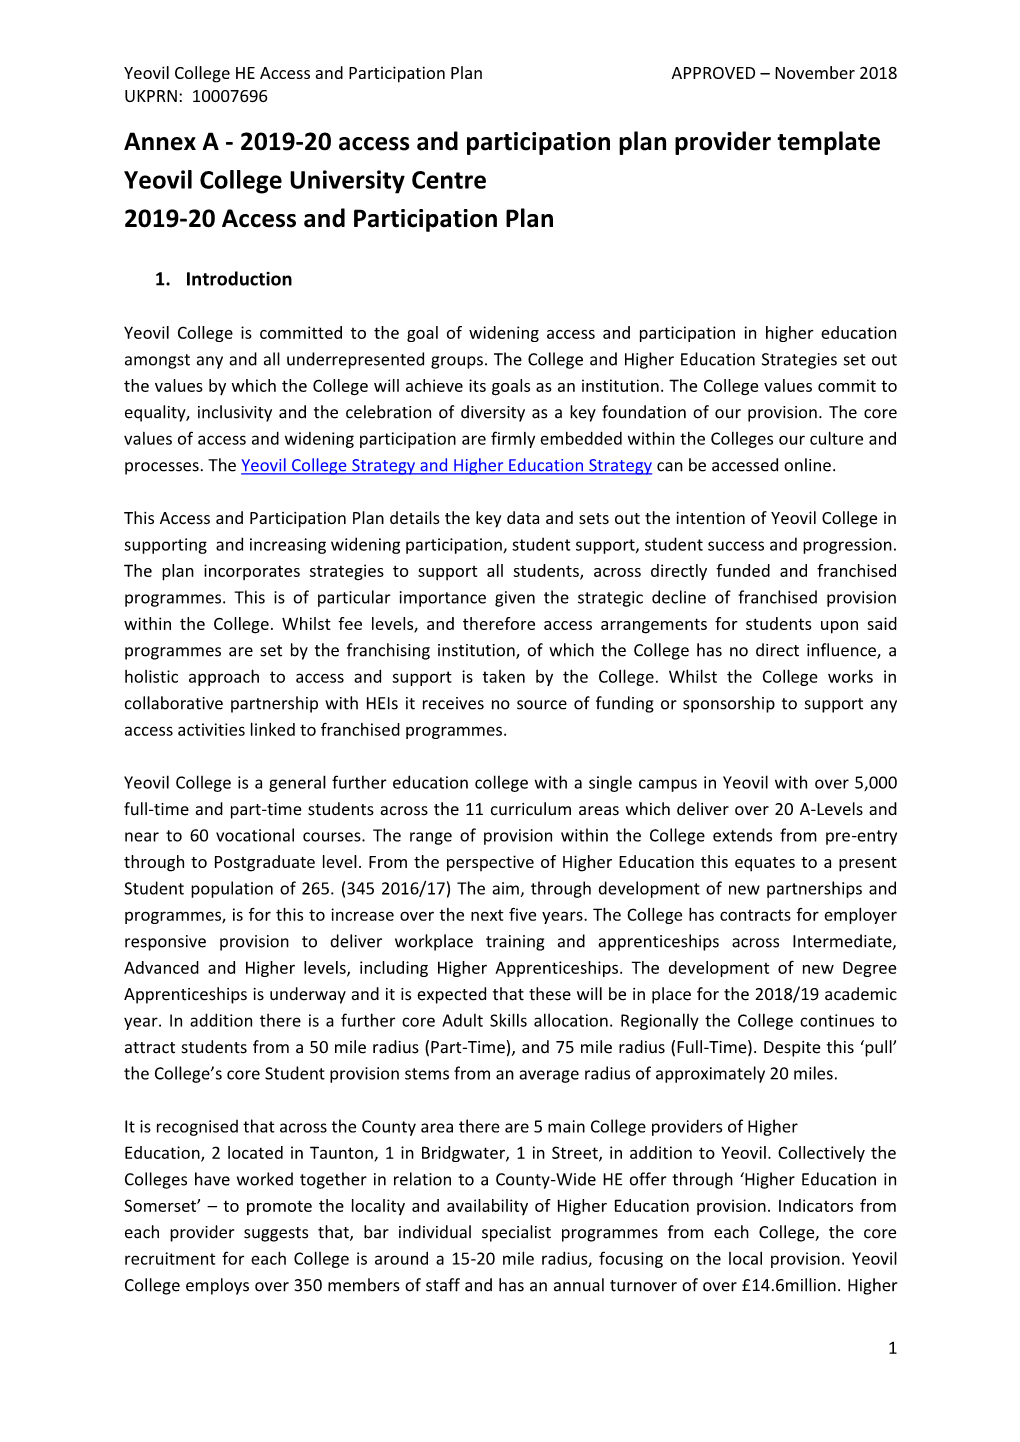 Yeovil-College-University-Centre-2019-20-Access-And-Participation-Plan.Pdf